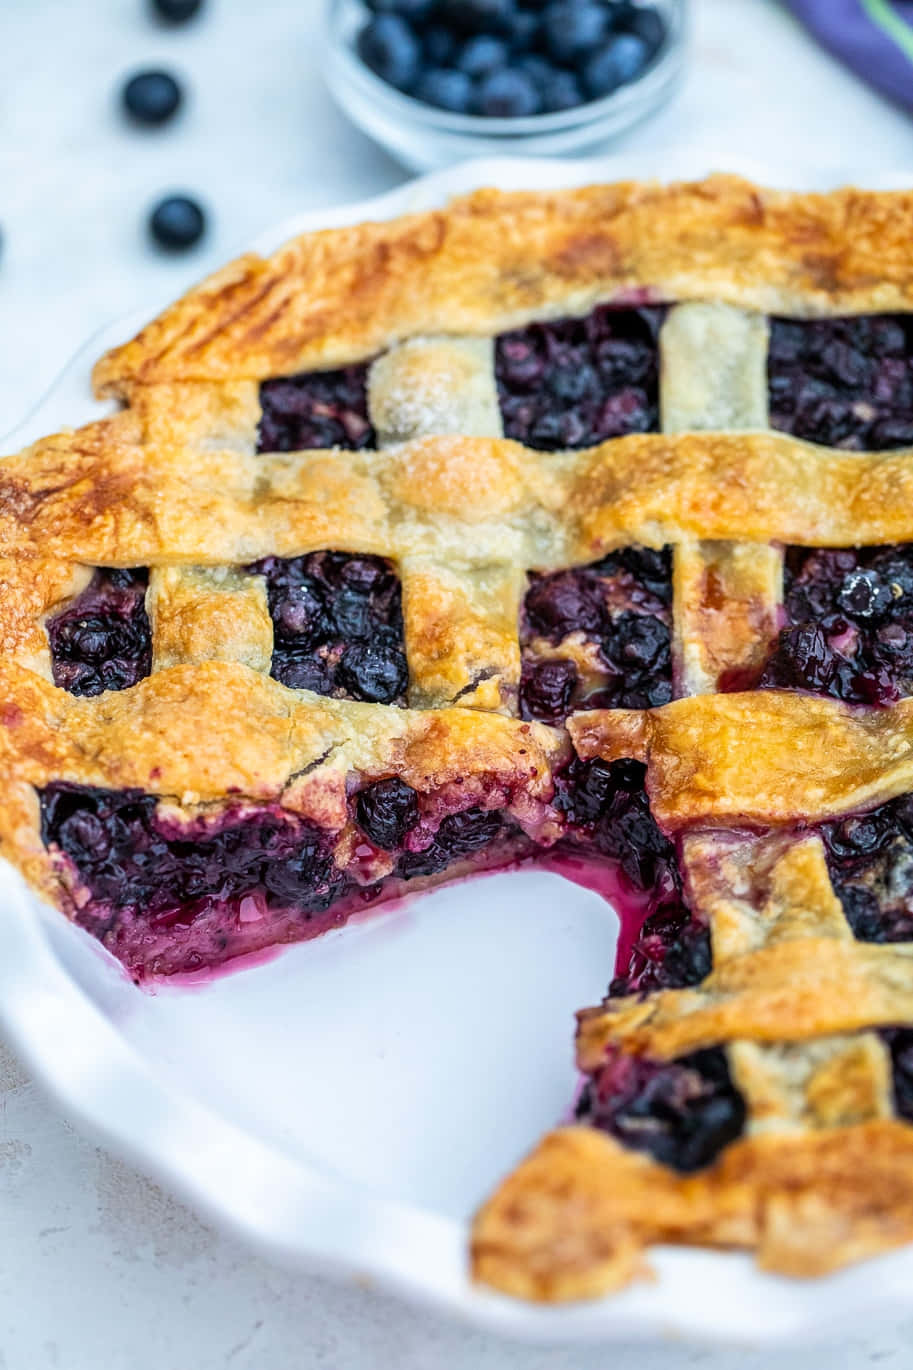 Sweet blueberry pie with fresh, juicy blueberries oozing out of a golden, flaky crust. Wallpaper